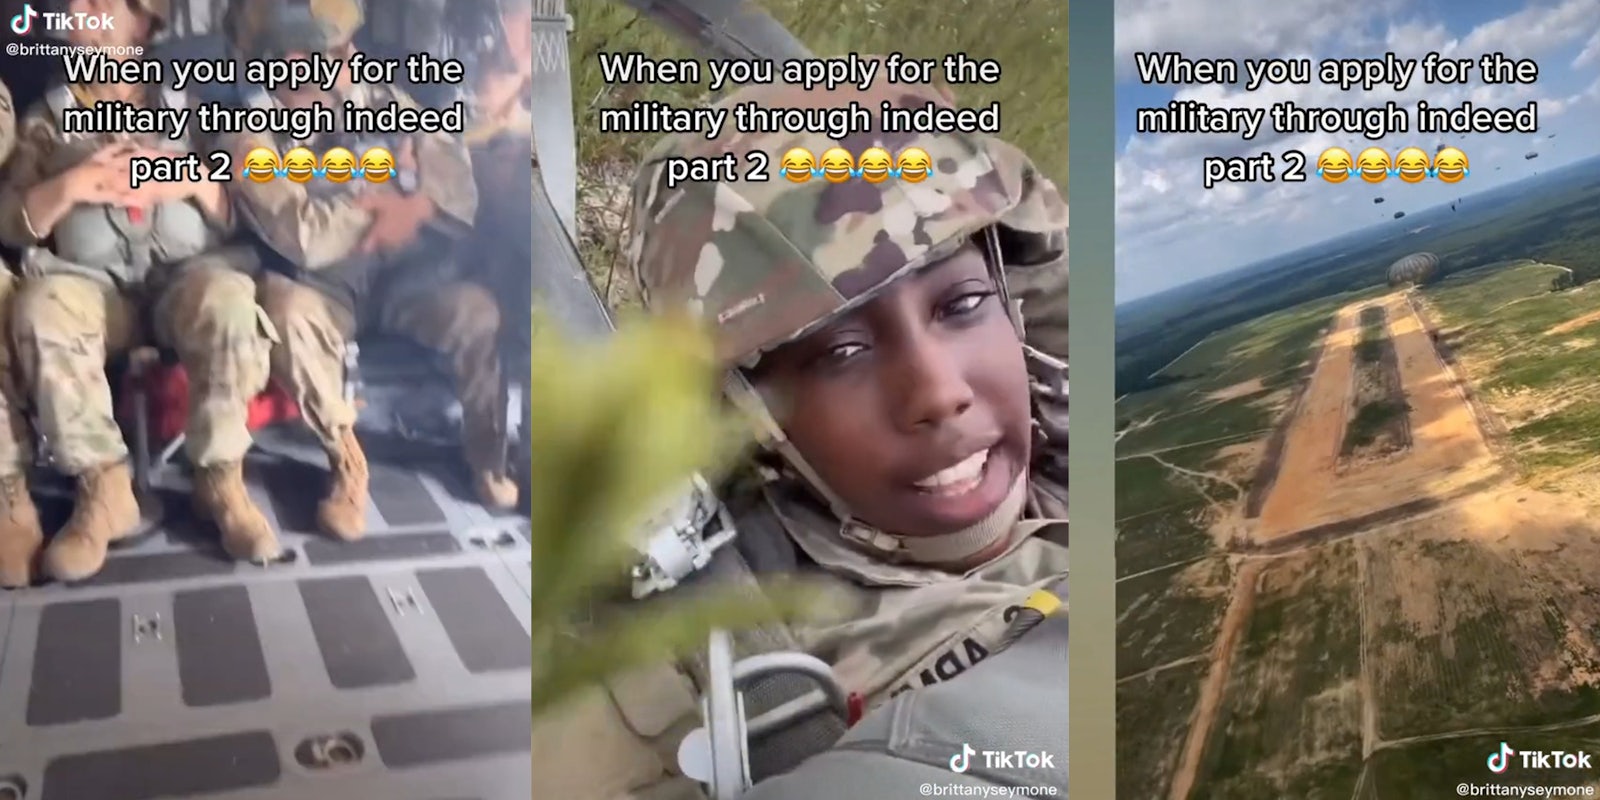 soldiers on airplane (l) young woman wearing army helmet and fatigues (c) soldiers parachuting across field (r) all with caption 'When you apply for the military through indeed part 2'